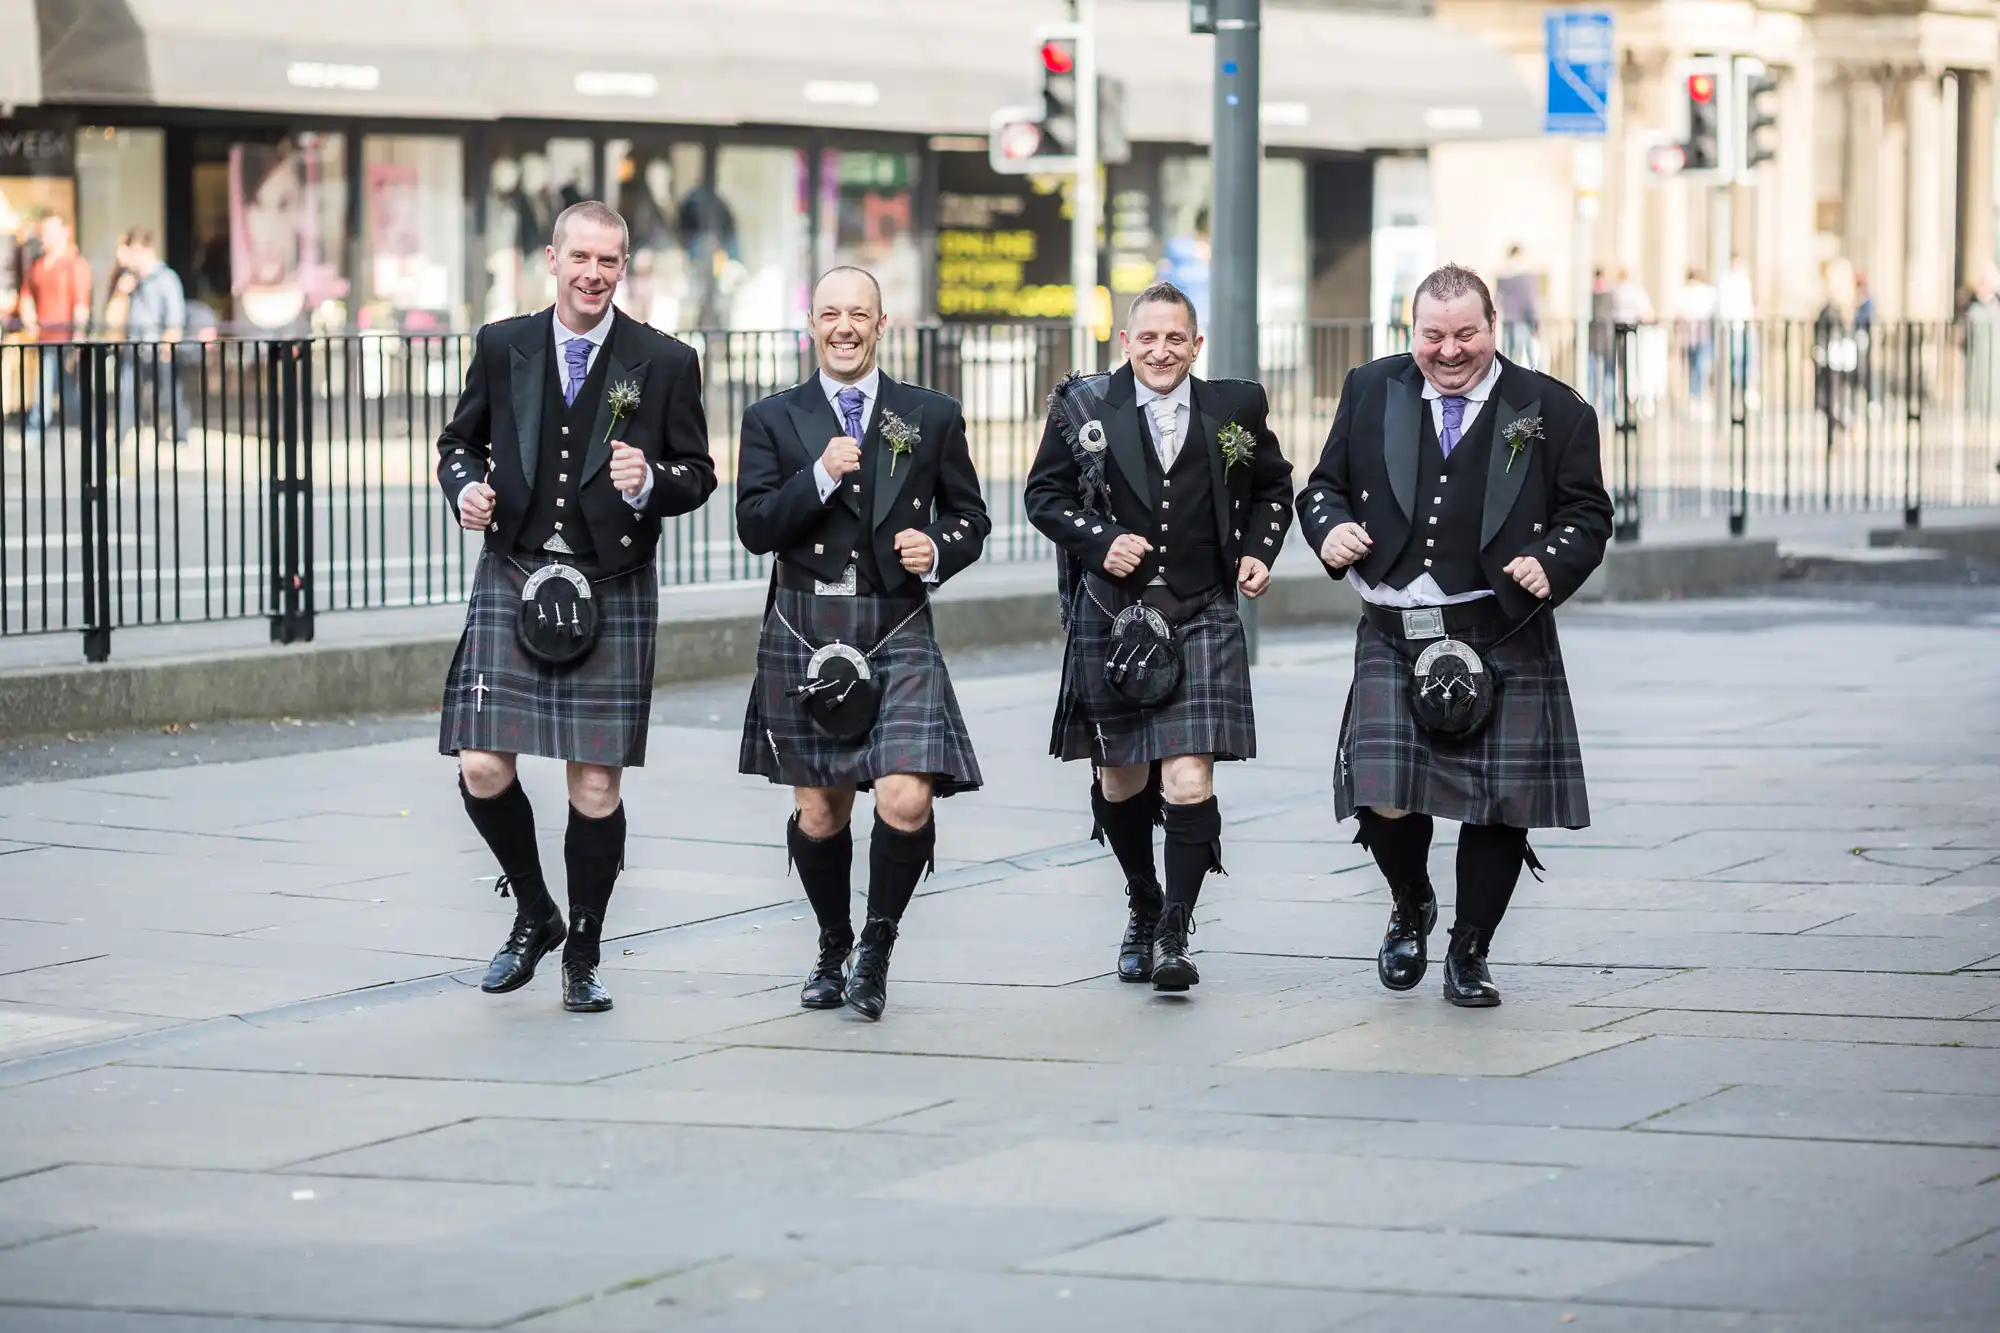 Four men in traditional scottish kilts and jackets, laughing and walking together on a city street.